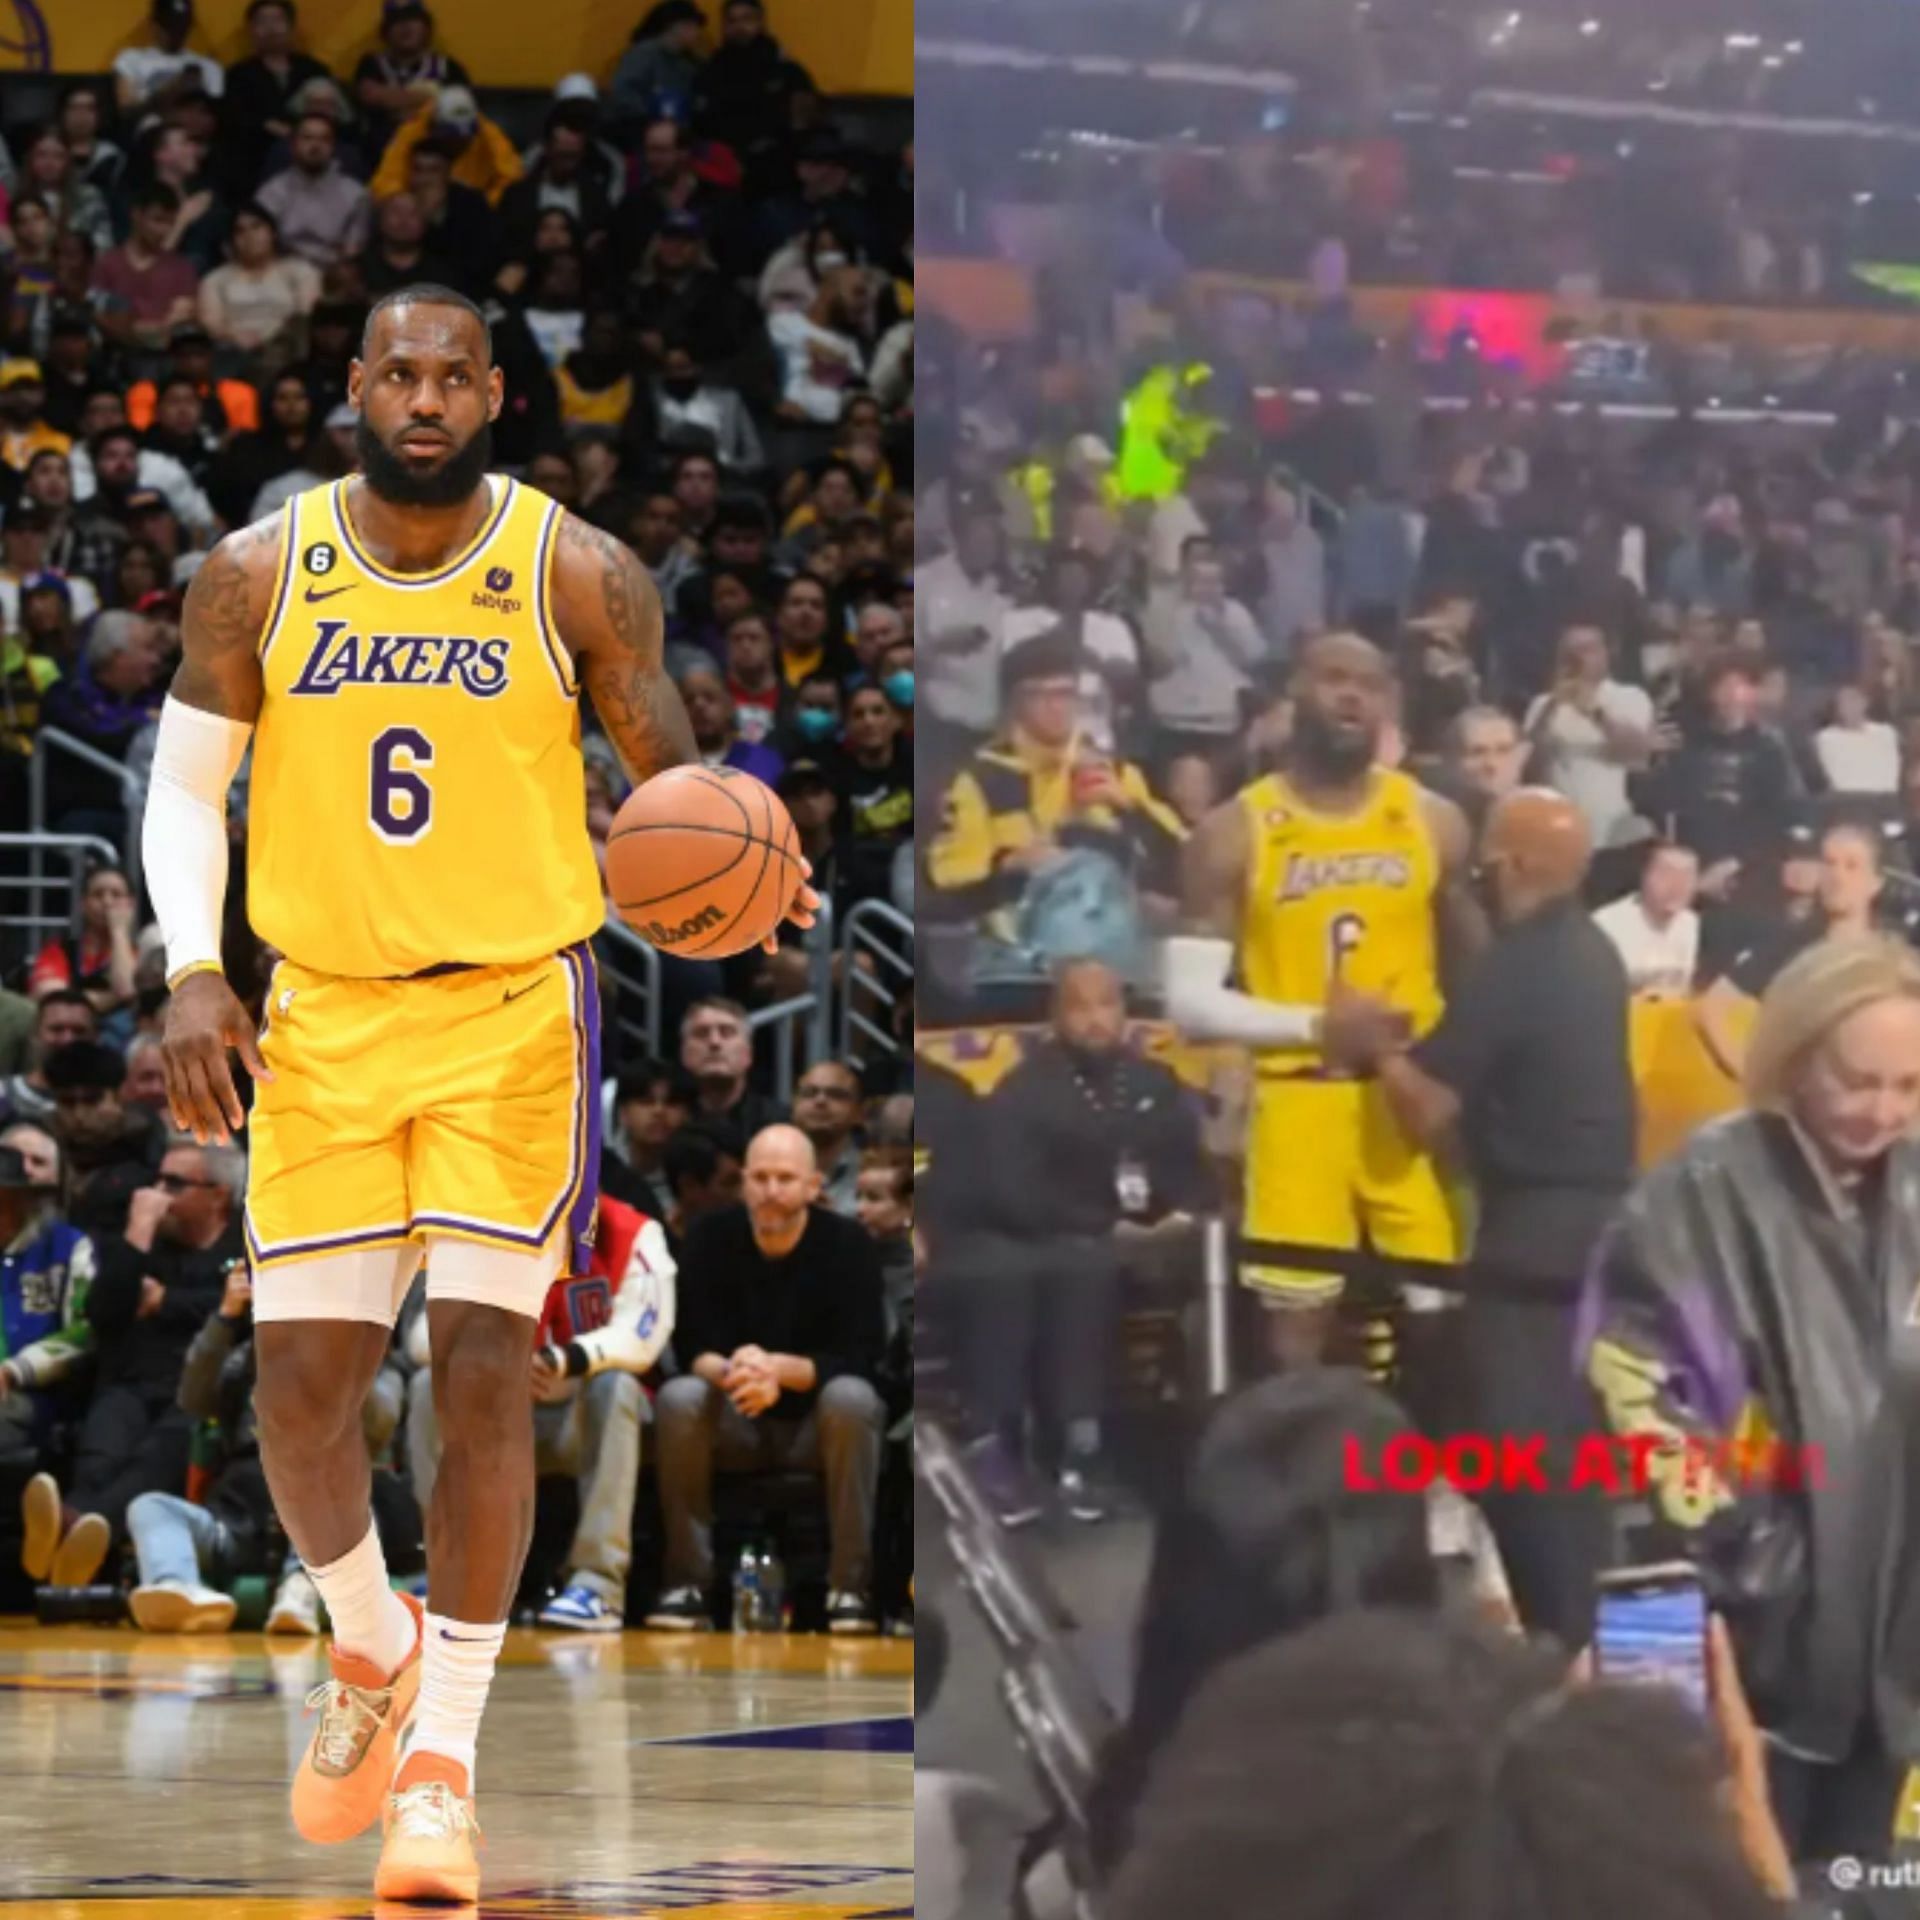 King James has heated moment with heckler on Jan 24th 2023 (vai Instagram)